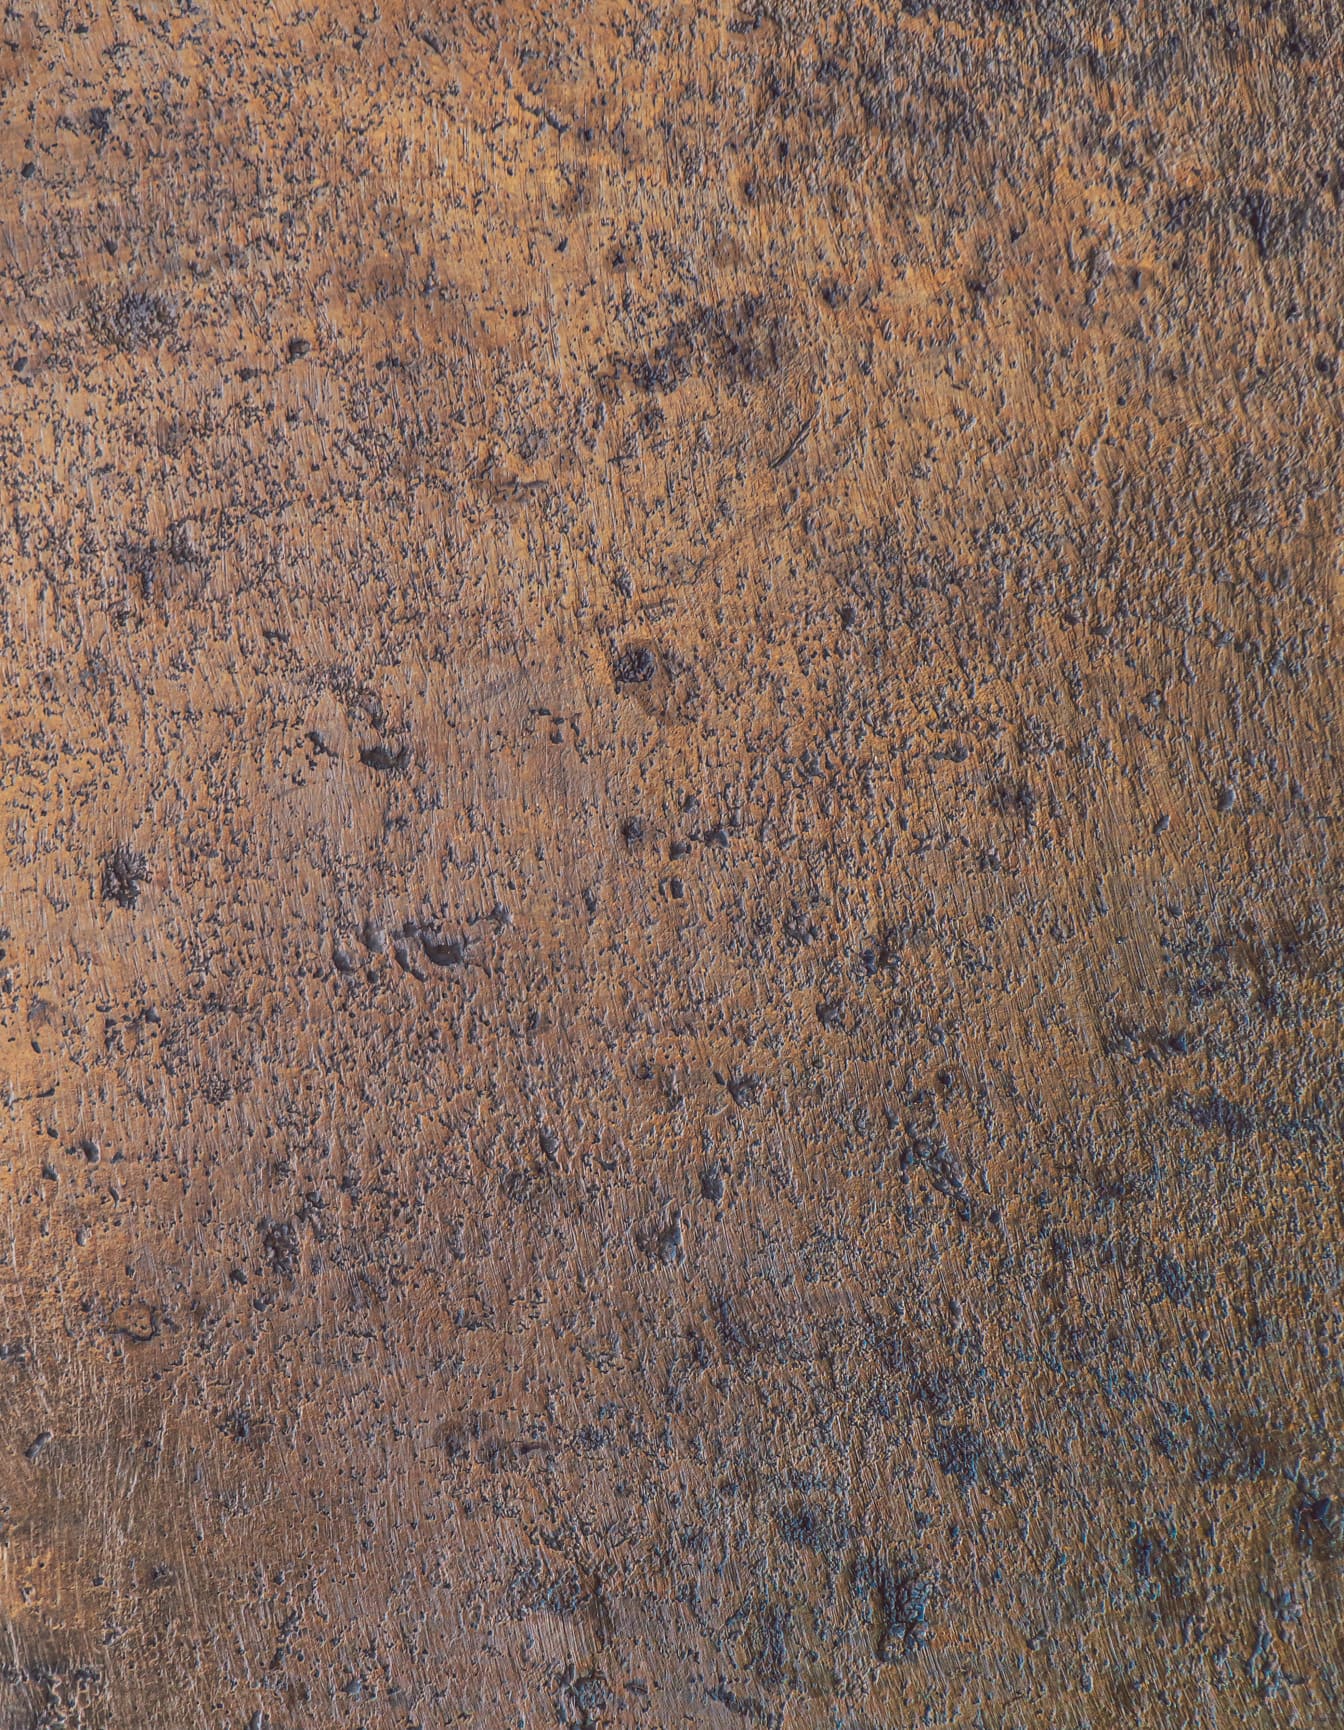 Yellowish brown rough bronze alloy metal close-up texture